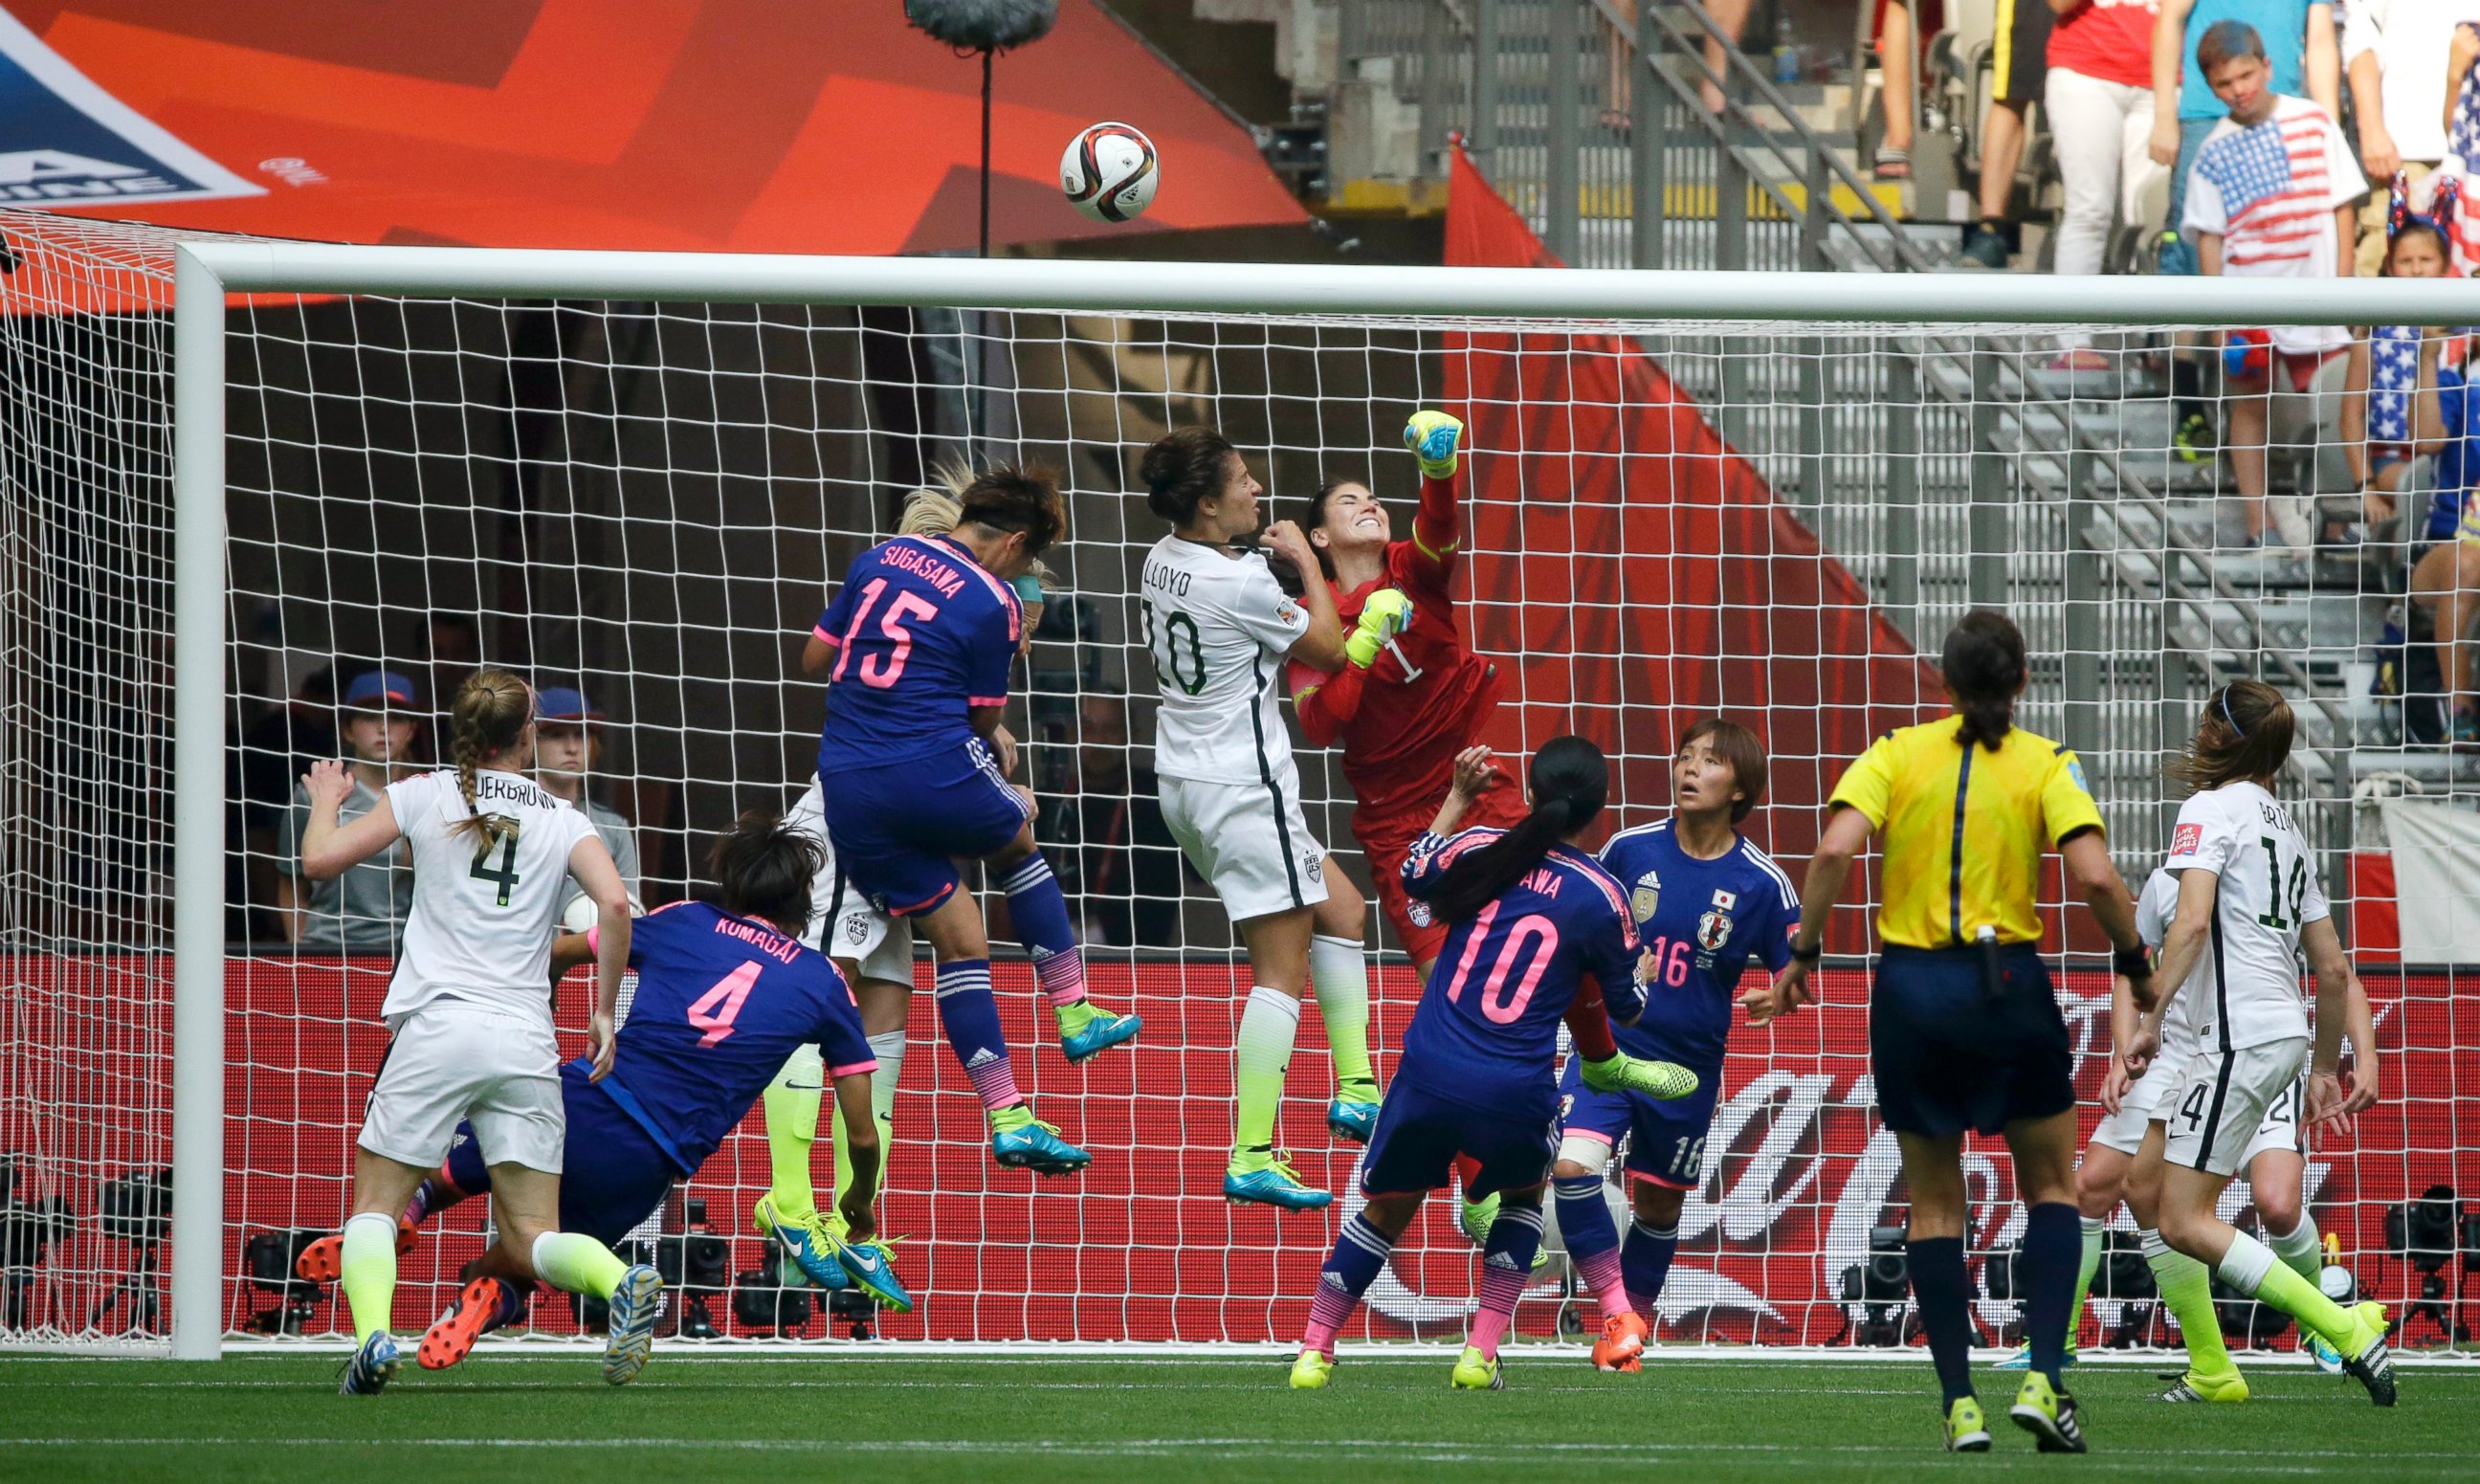 PHOTO: United States goalkeeper Hope Solo (1), center, punches away a shot from Japan during the second half of the FIFA Women's World Cup soccer championship in Vancouver, British Columbia, Canada, Sunday, July 5, 2015.